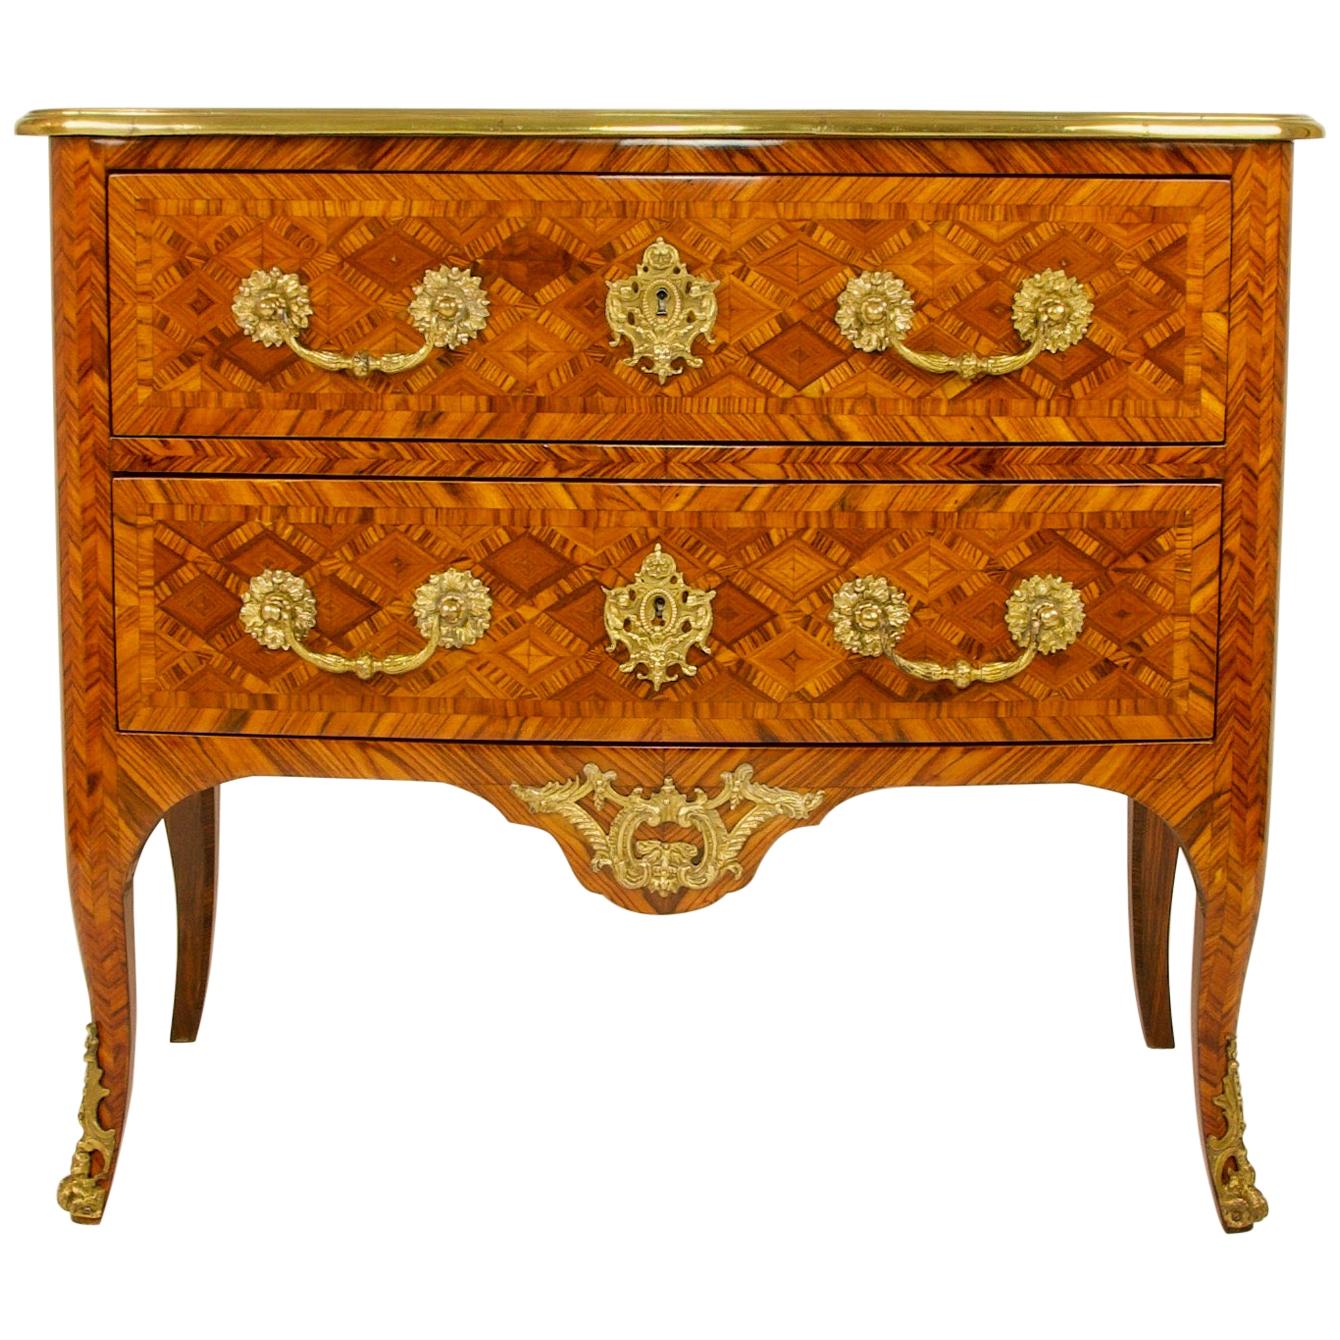 19th Century French Louis XIV Régence Trelliswork Marquetry Commode or Sauteuse